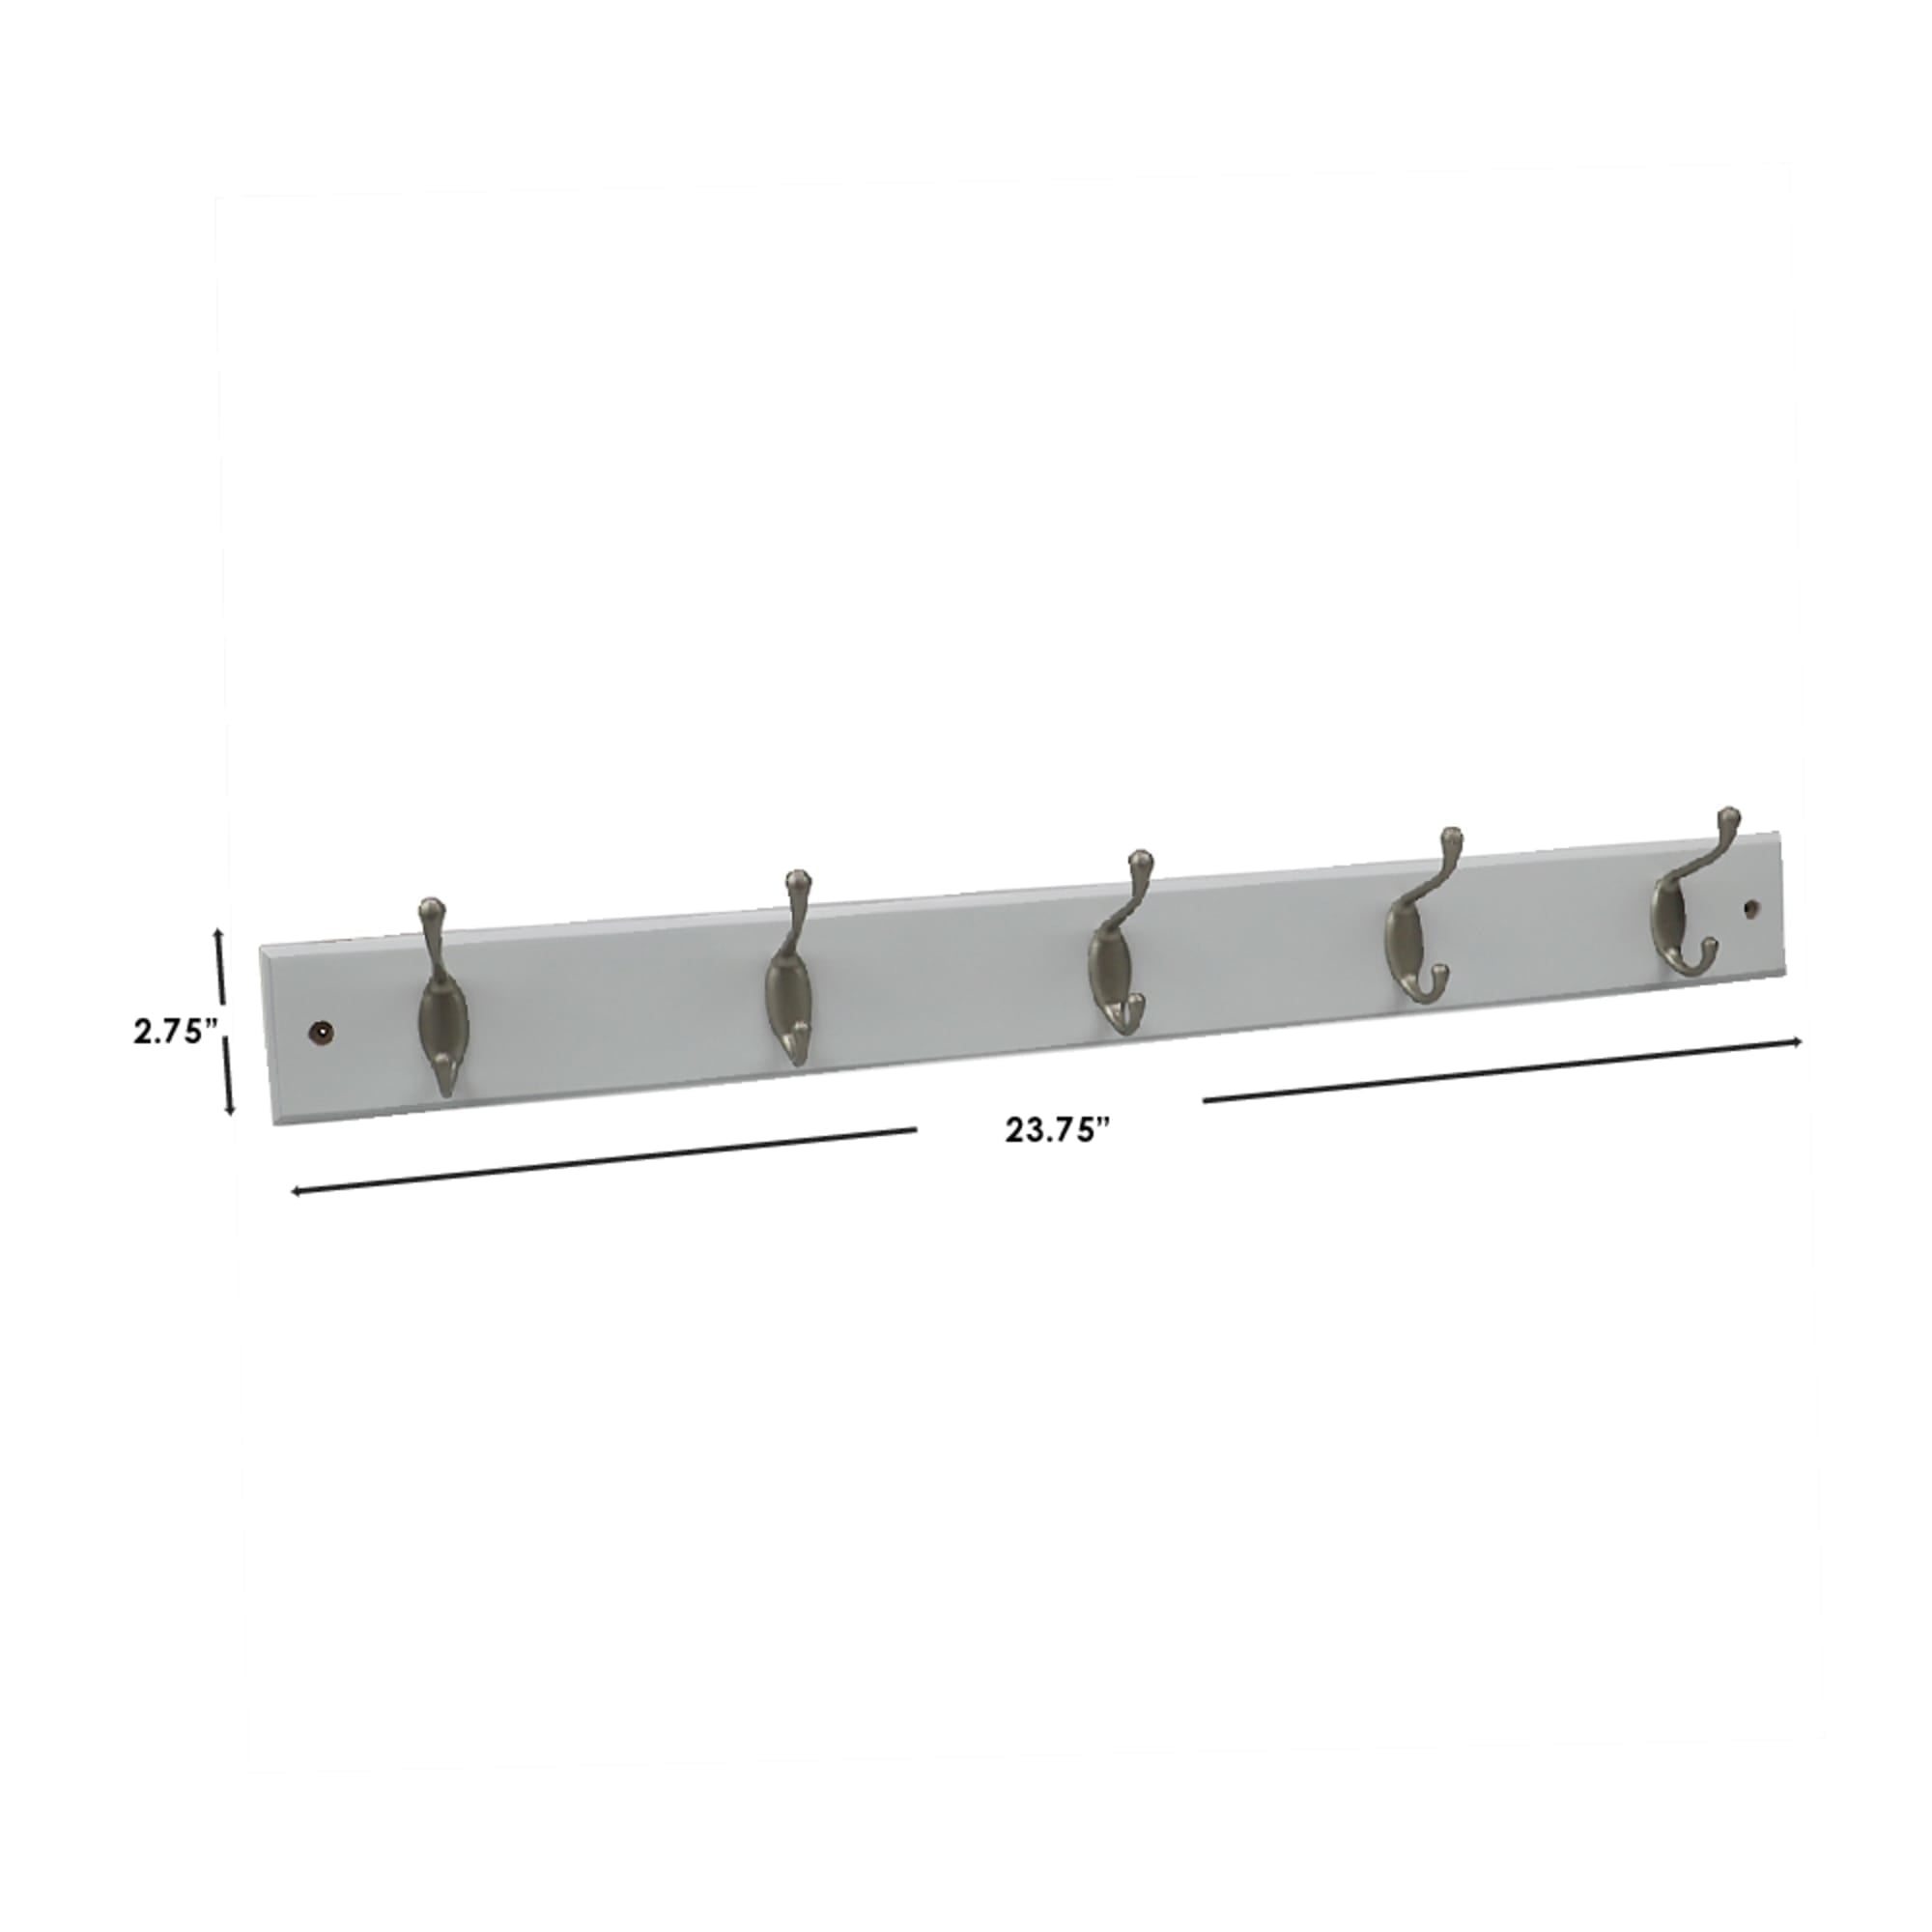 Home Basics 5 Double Hook Wall Mounted Hanging Rack, White $12.00 EACH, CASE PACK OF 12